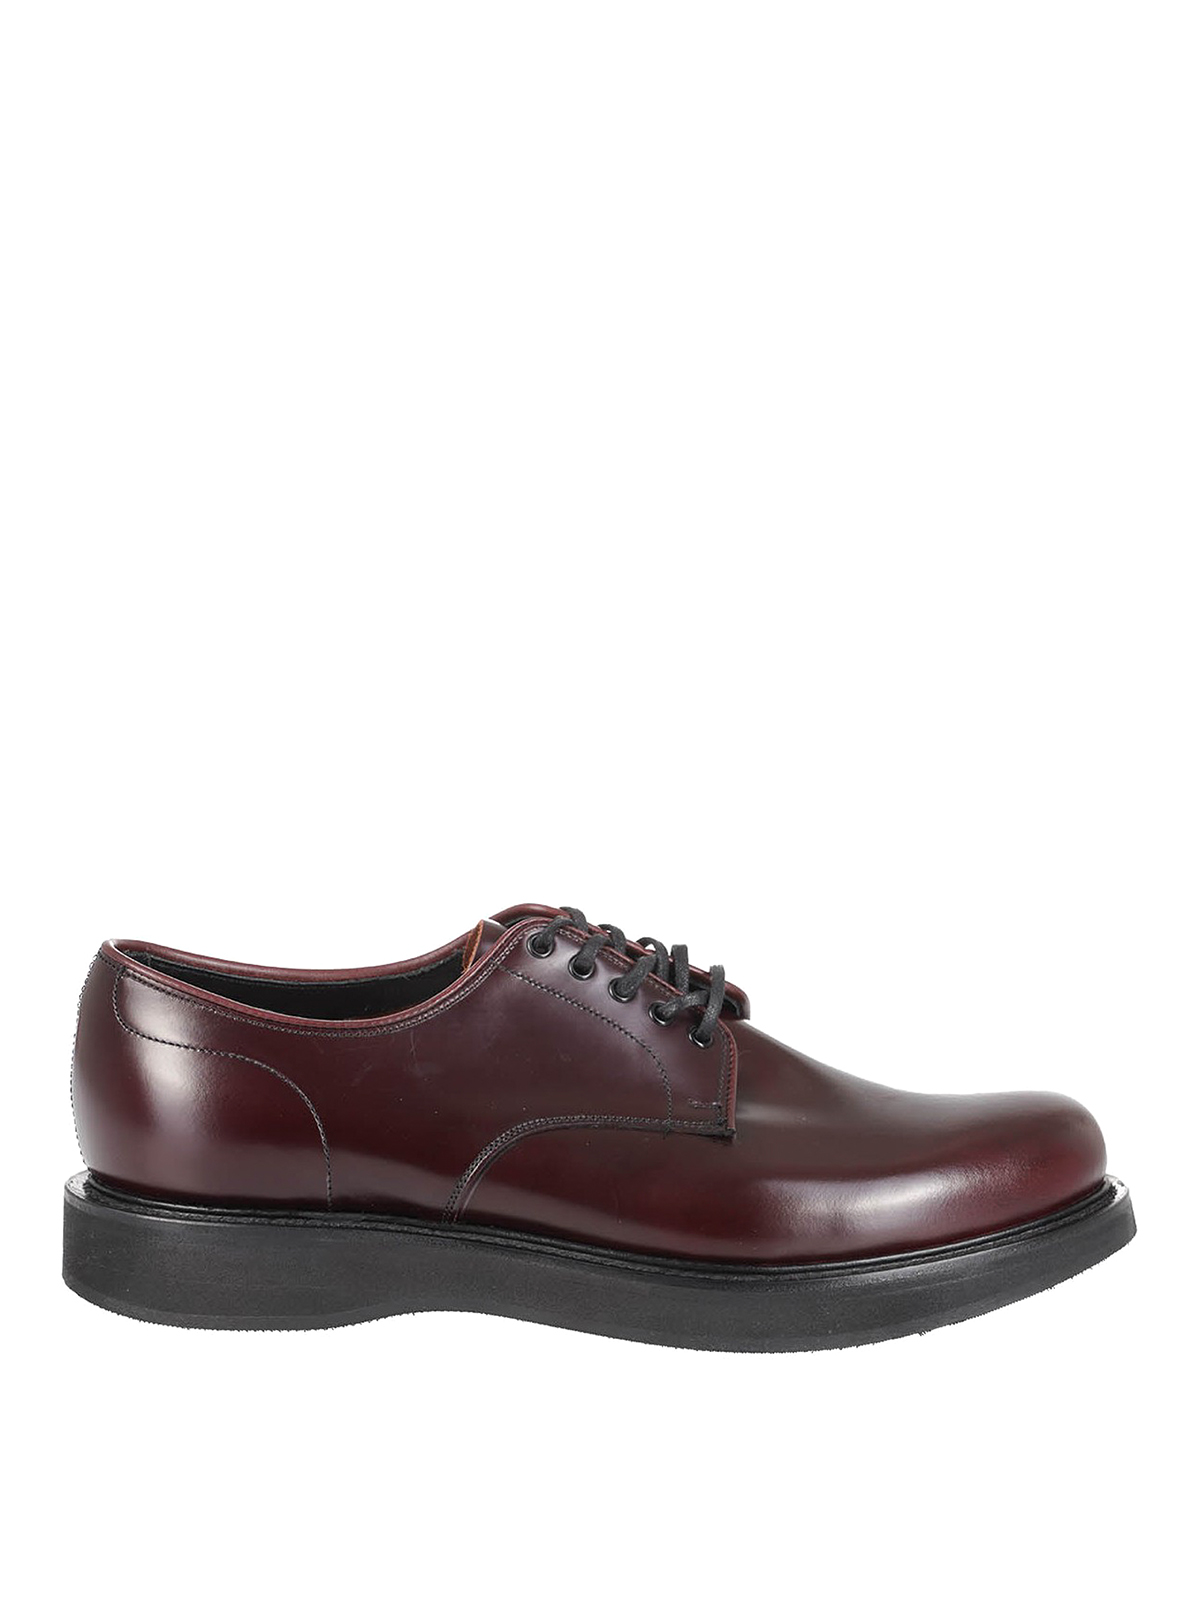 Church's - Leyton 5 smooth leather Derby shoes - lace-ups shoes ...